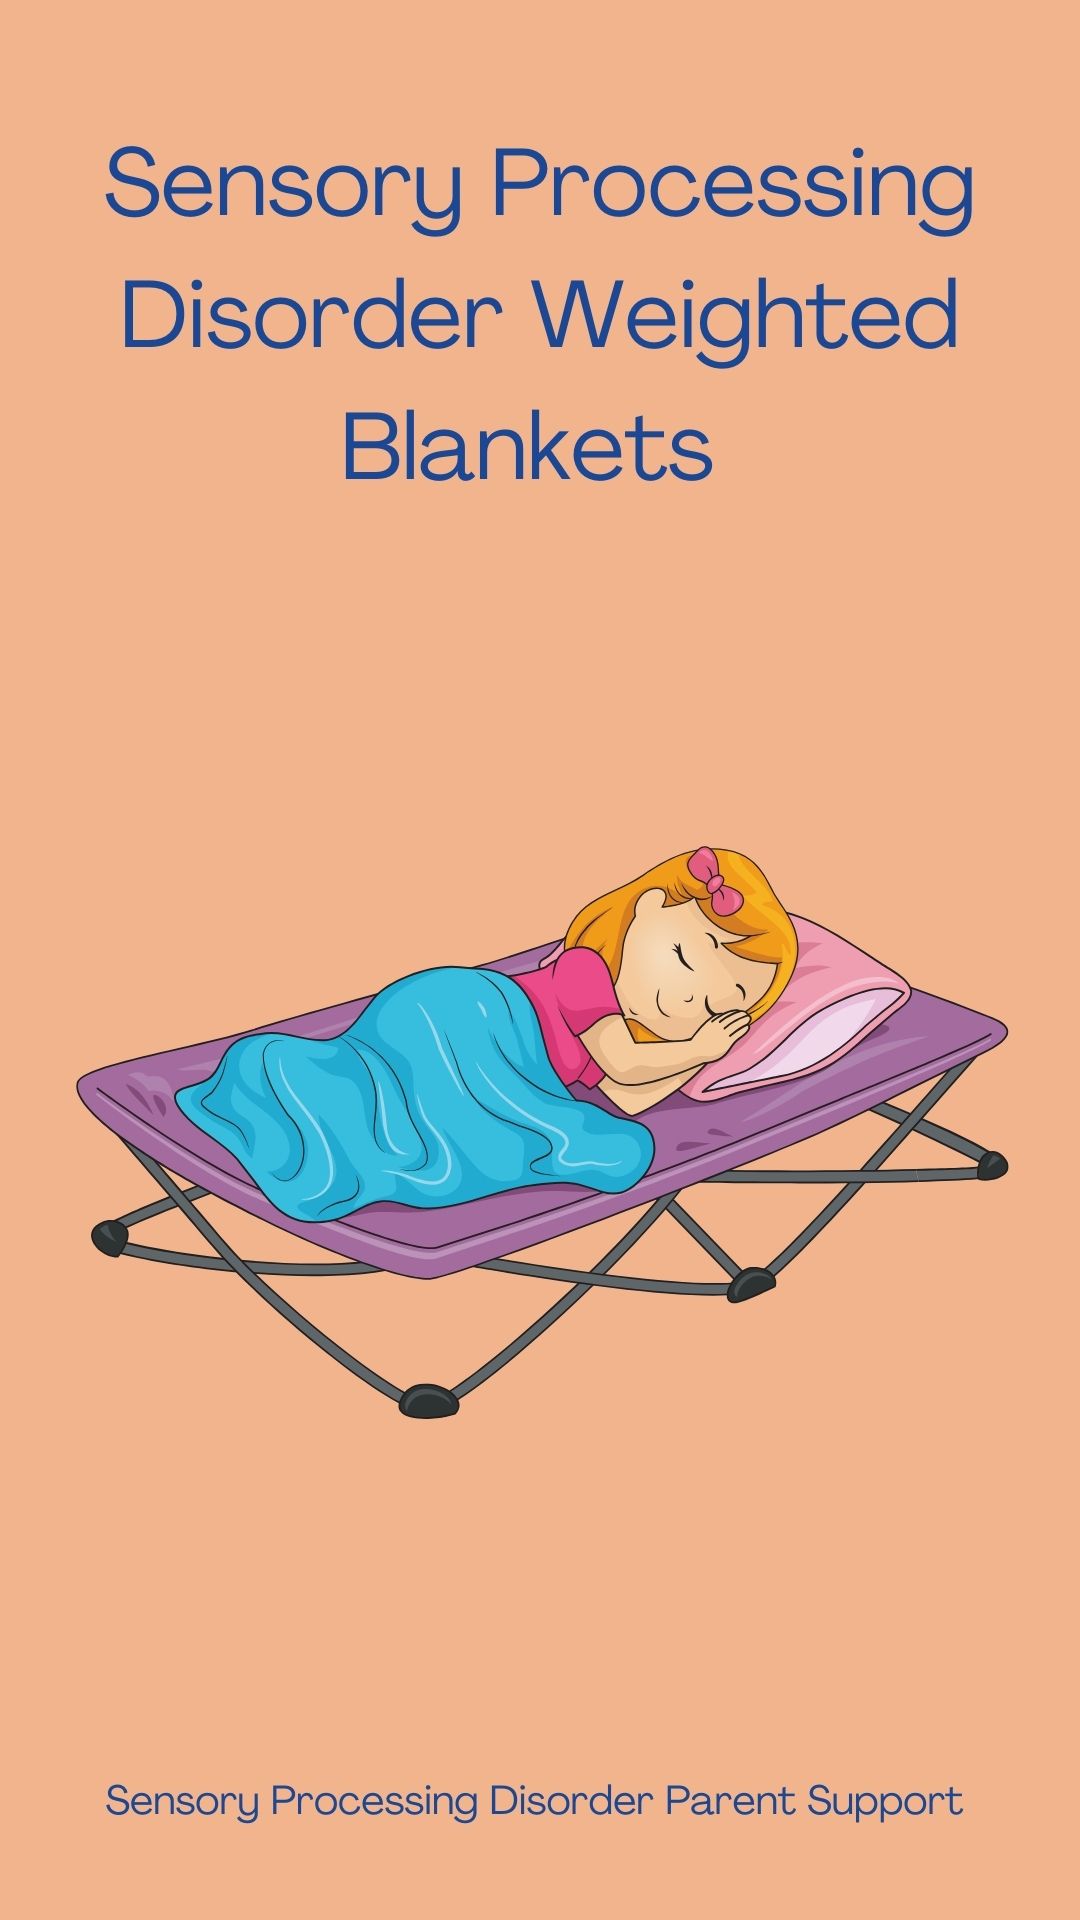 Sensory Processing Disorder Weighted Blankets